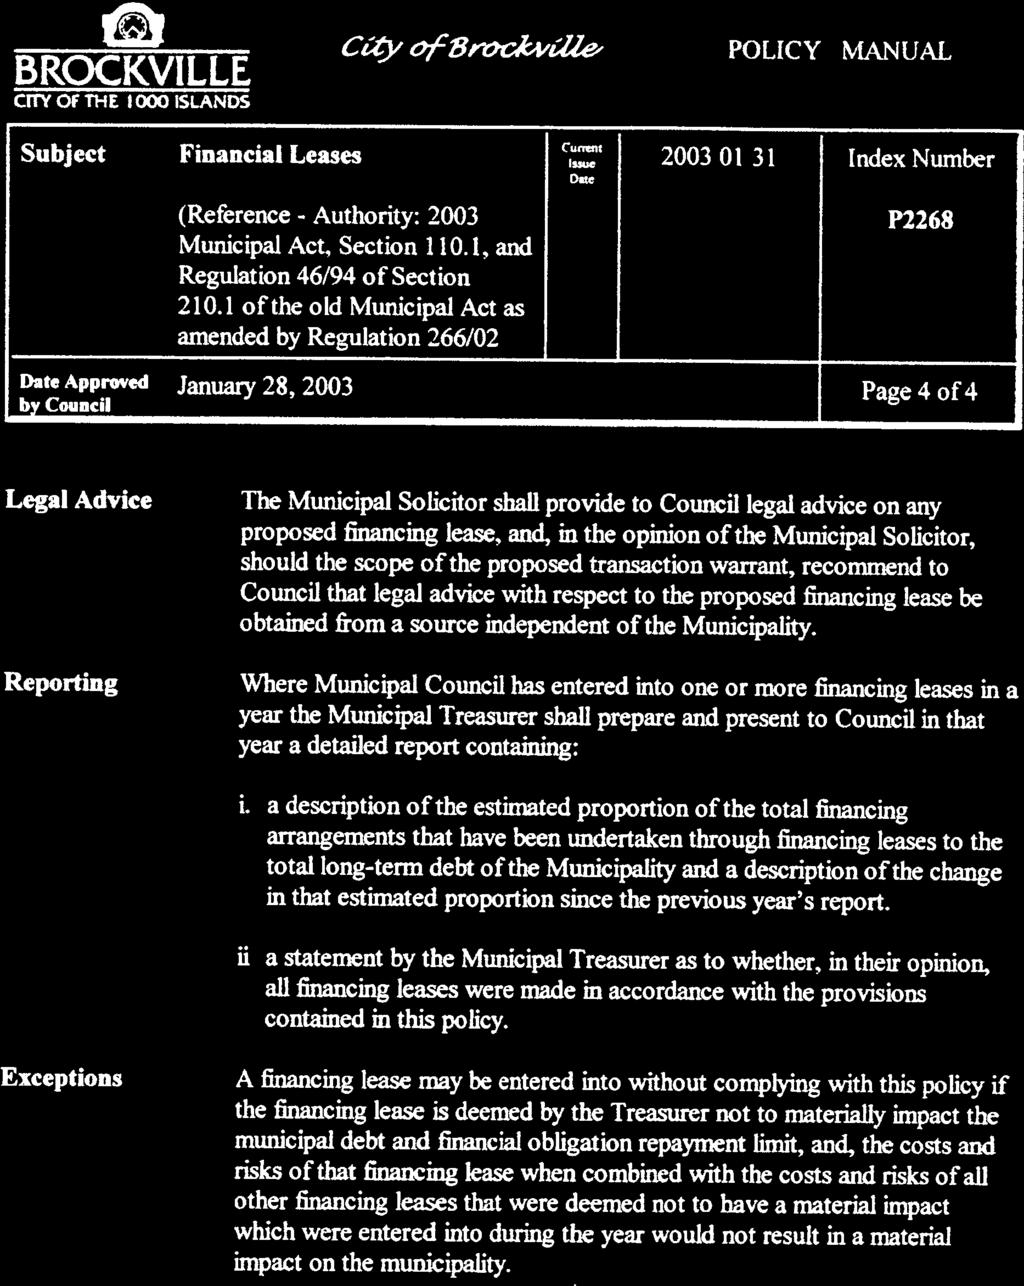 BROCKVILLE CTTY OF THE 1000 ISLANDS City of8rockvtlle- POLICY MANUAL Subject Financial Leases 2003 01 31 Index Number (Reference - Authority: 2003 P2268 Municipal Act, Section 110.